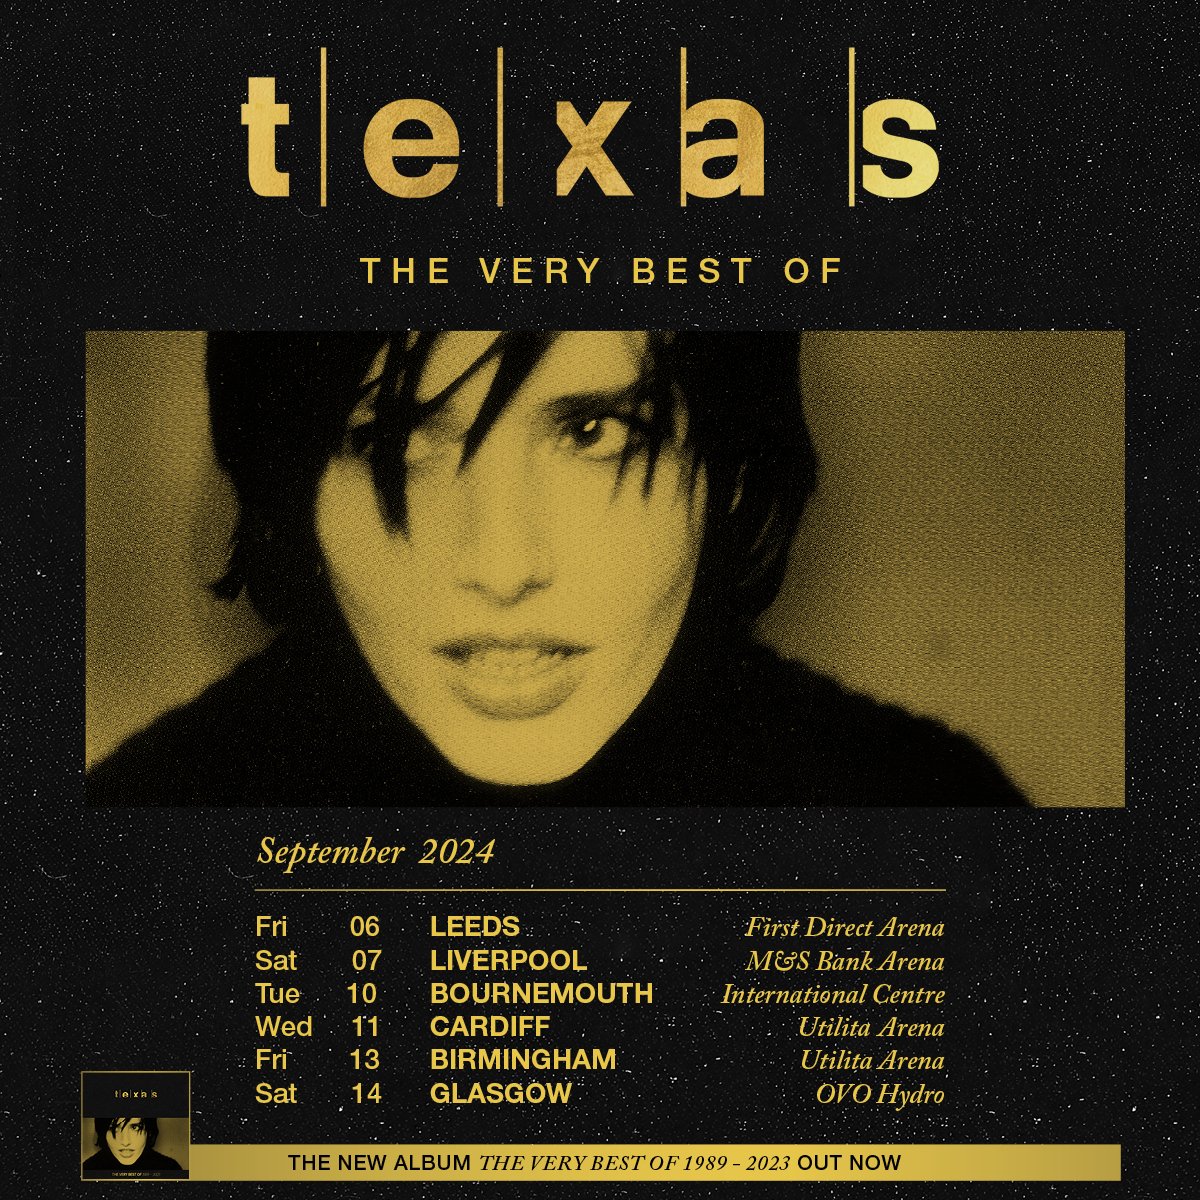 Texas Line Up The Very Best Of UK Arena Tour For September 2024 -  Stereoboard